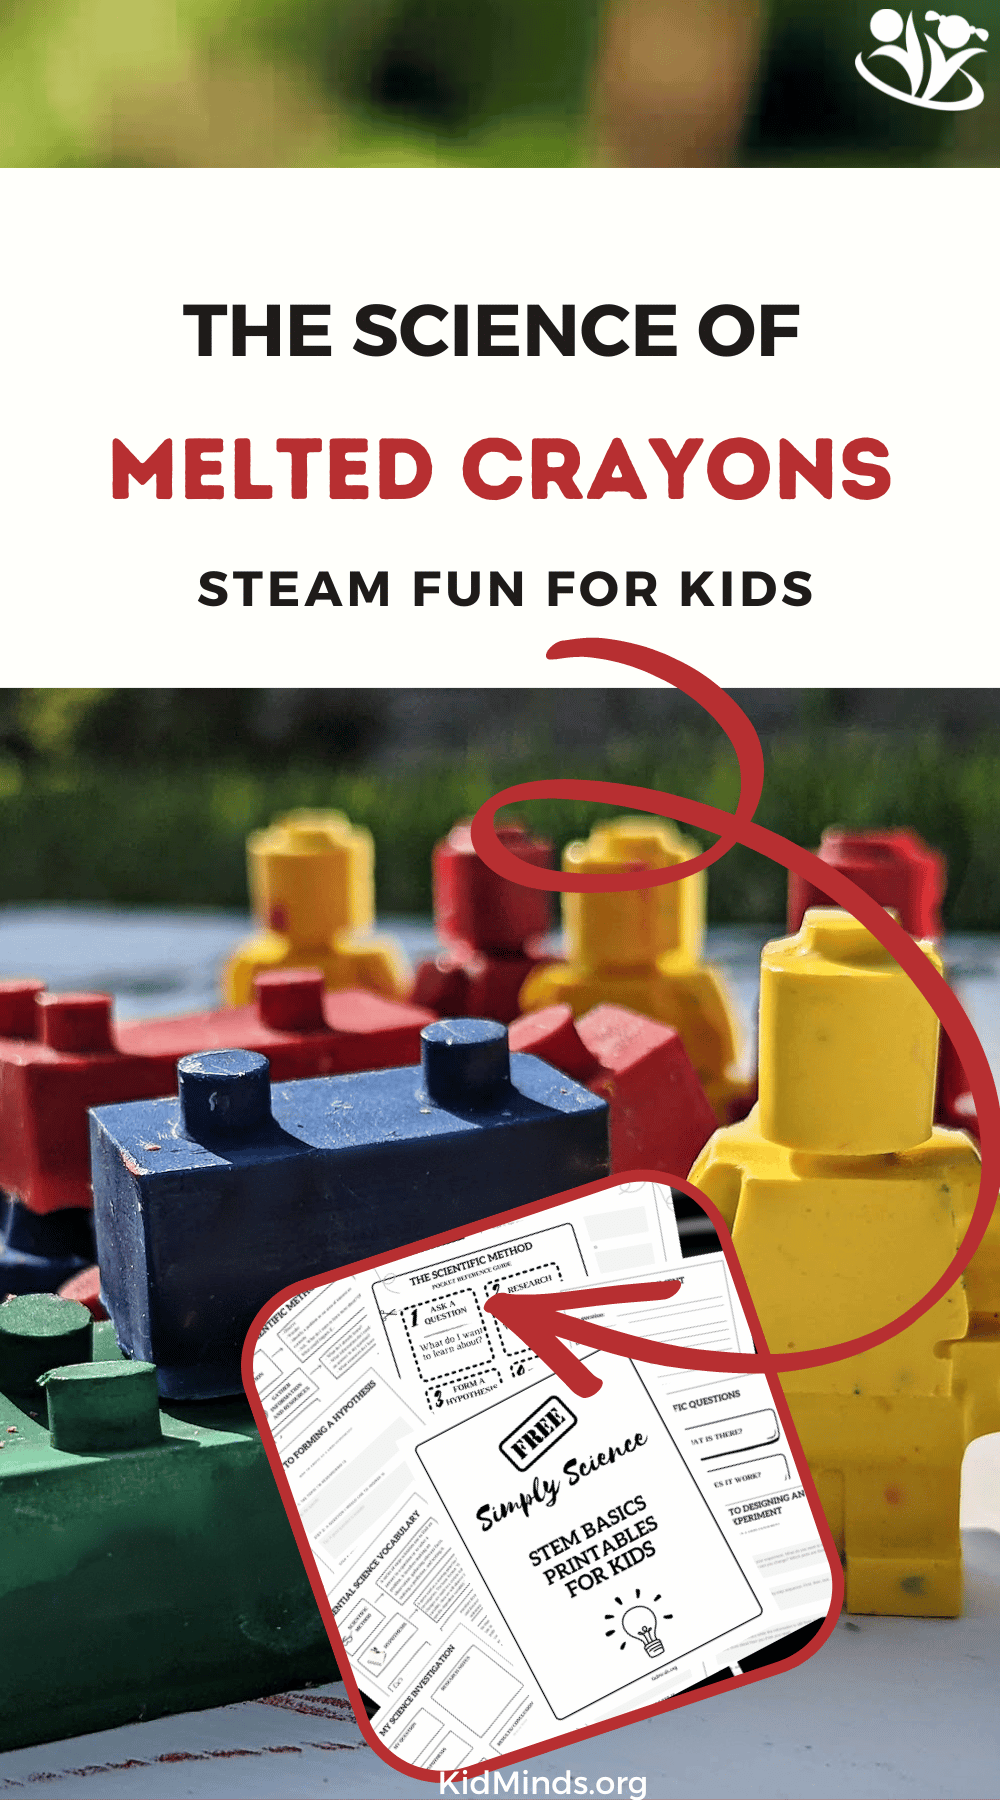 A fool-proof guide to melting old and broken crayons down and turning them into super cool LEGO. #kidsactivities #learning #kidminds #handsonlearning #learningisfun #funscience #crayons #laughingkidslearn #homeschooling #familyfun #LEGO